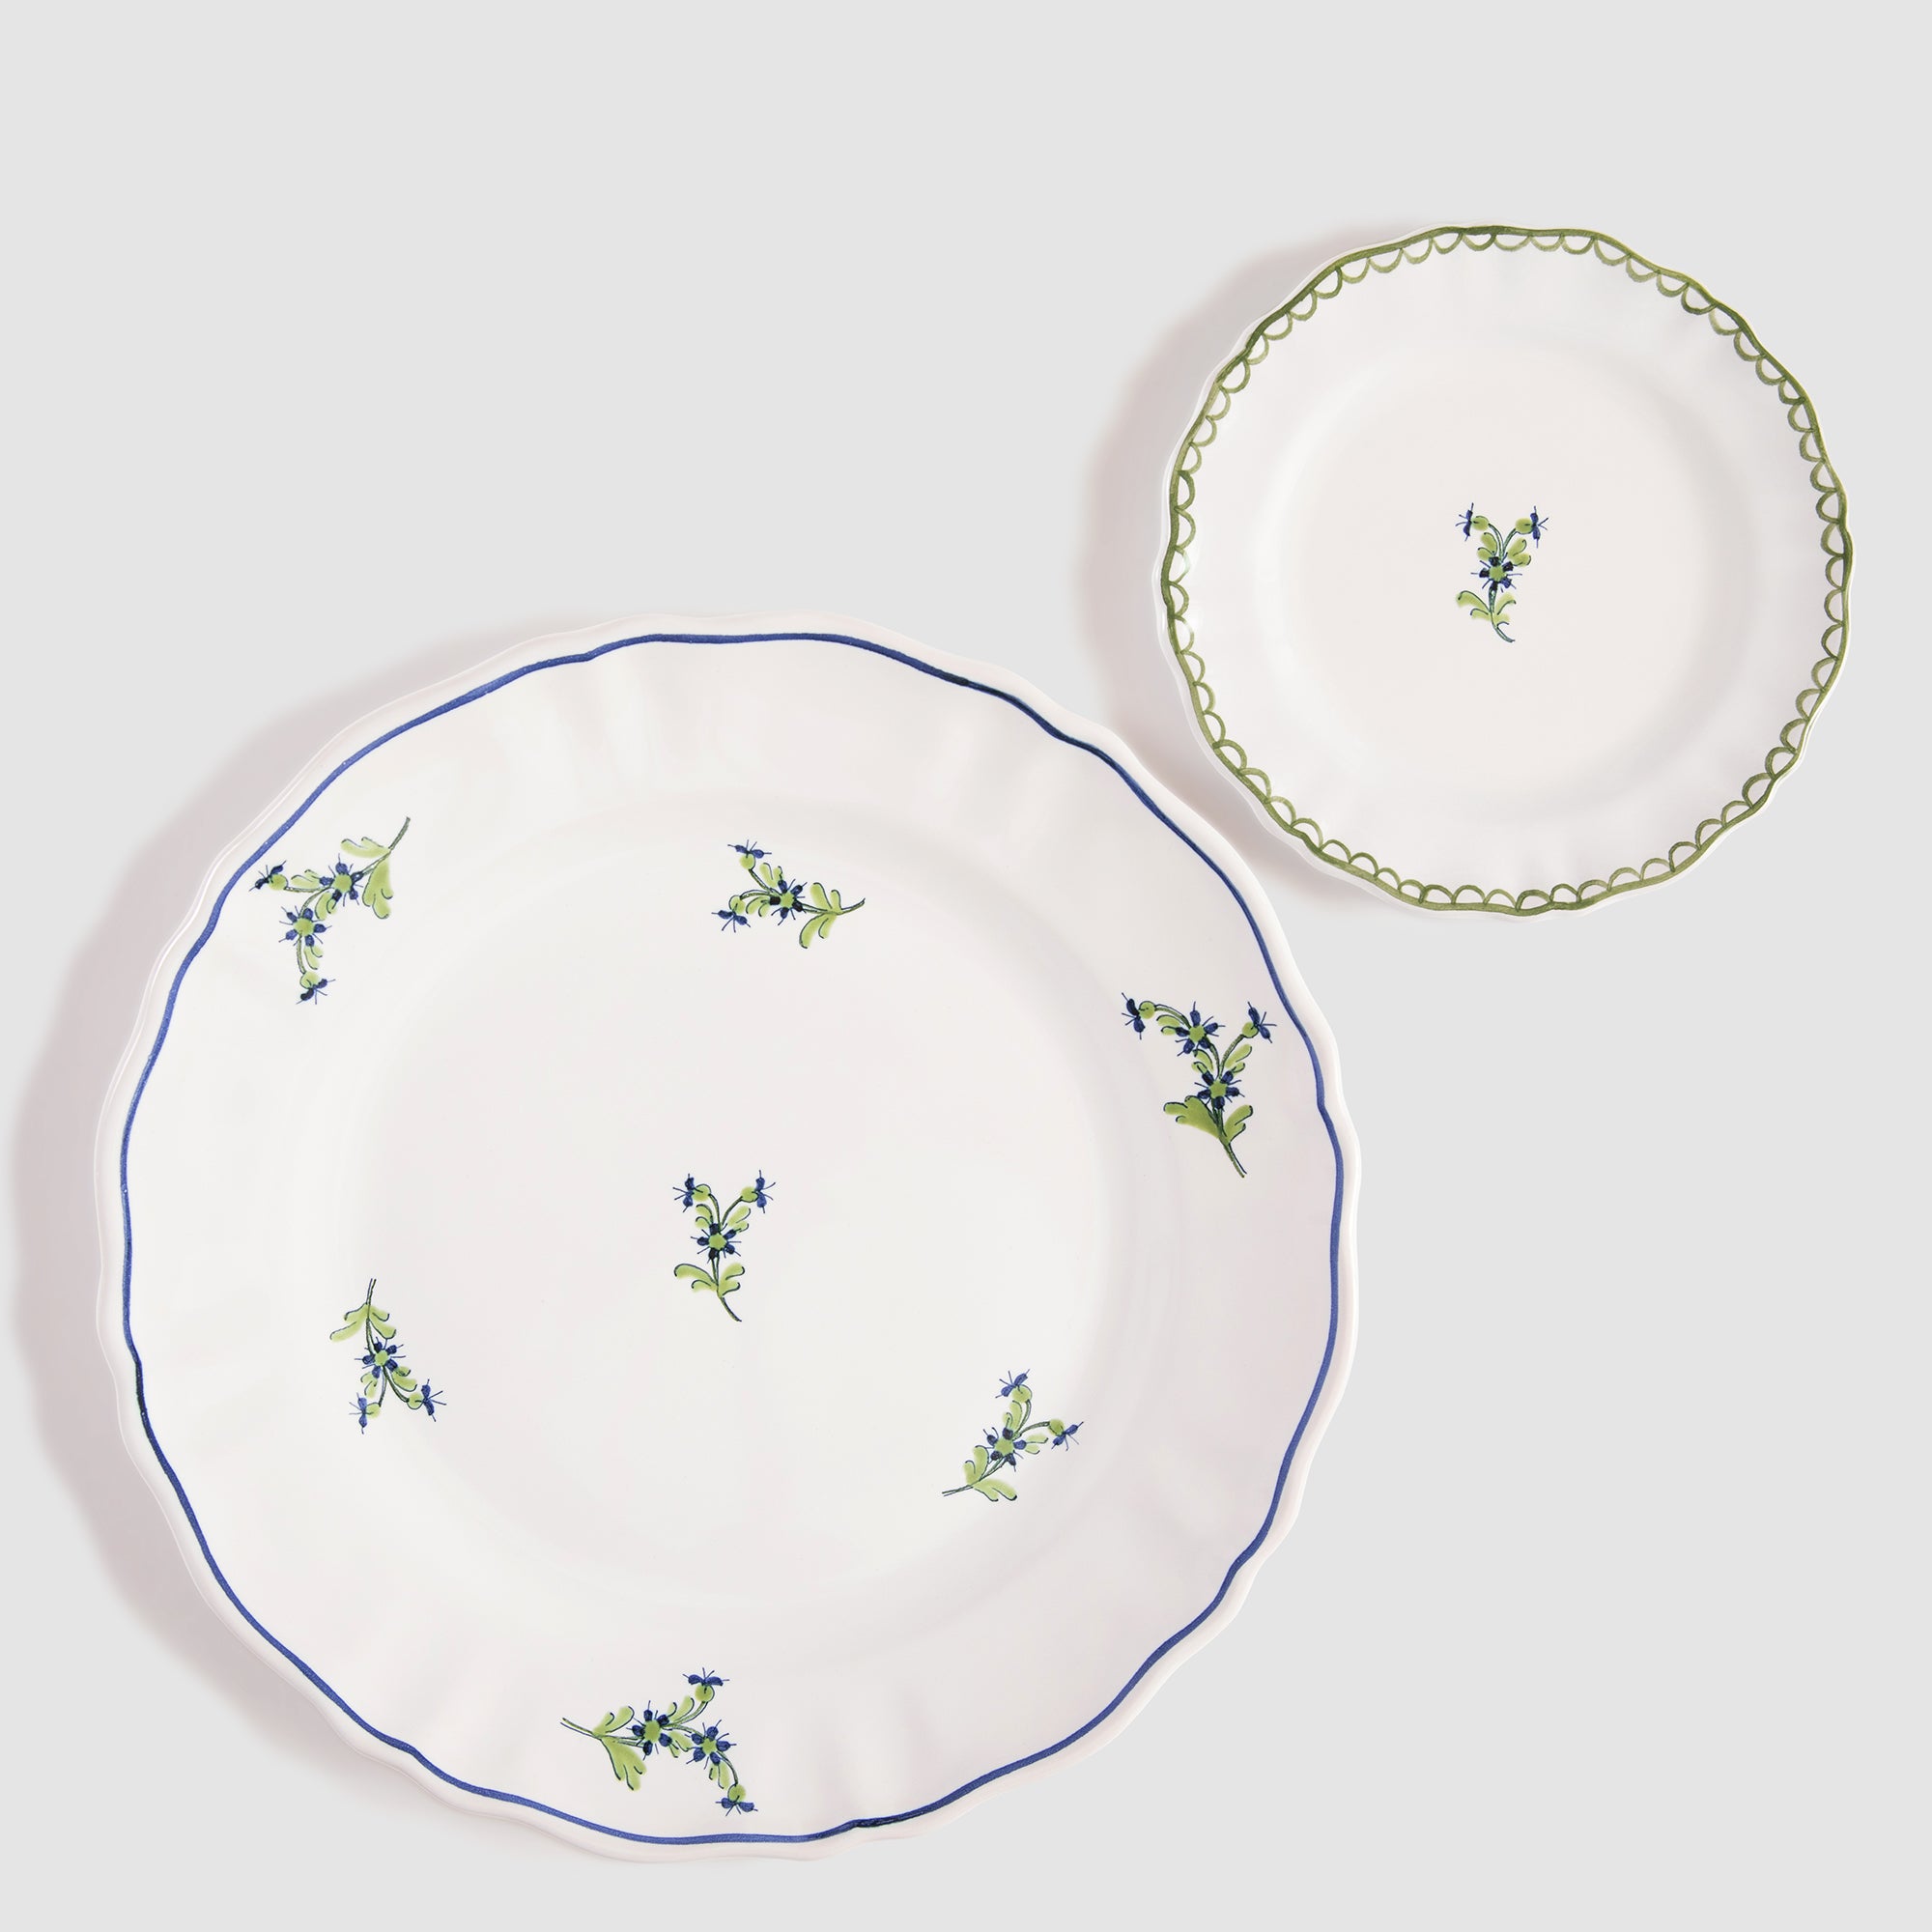 Bouclette Round Petite Plate, Blue and Green with Les Bleuets Dinner Plate